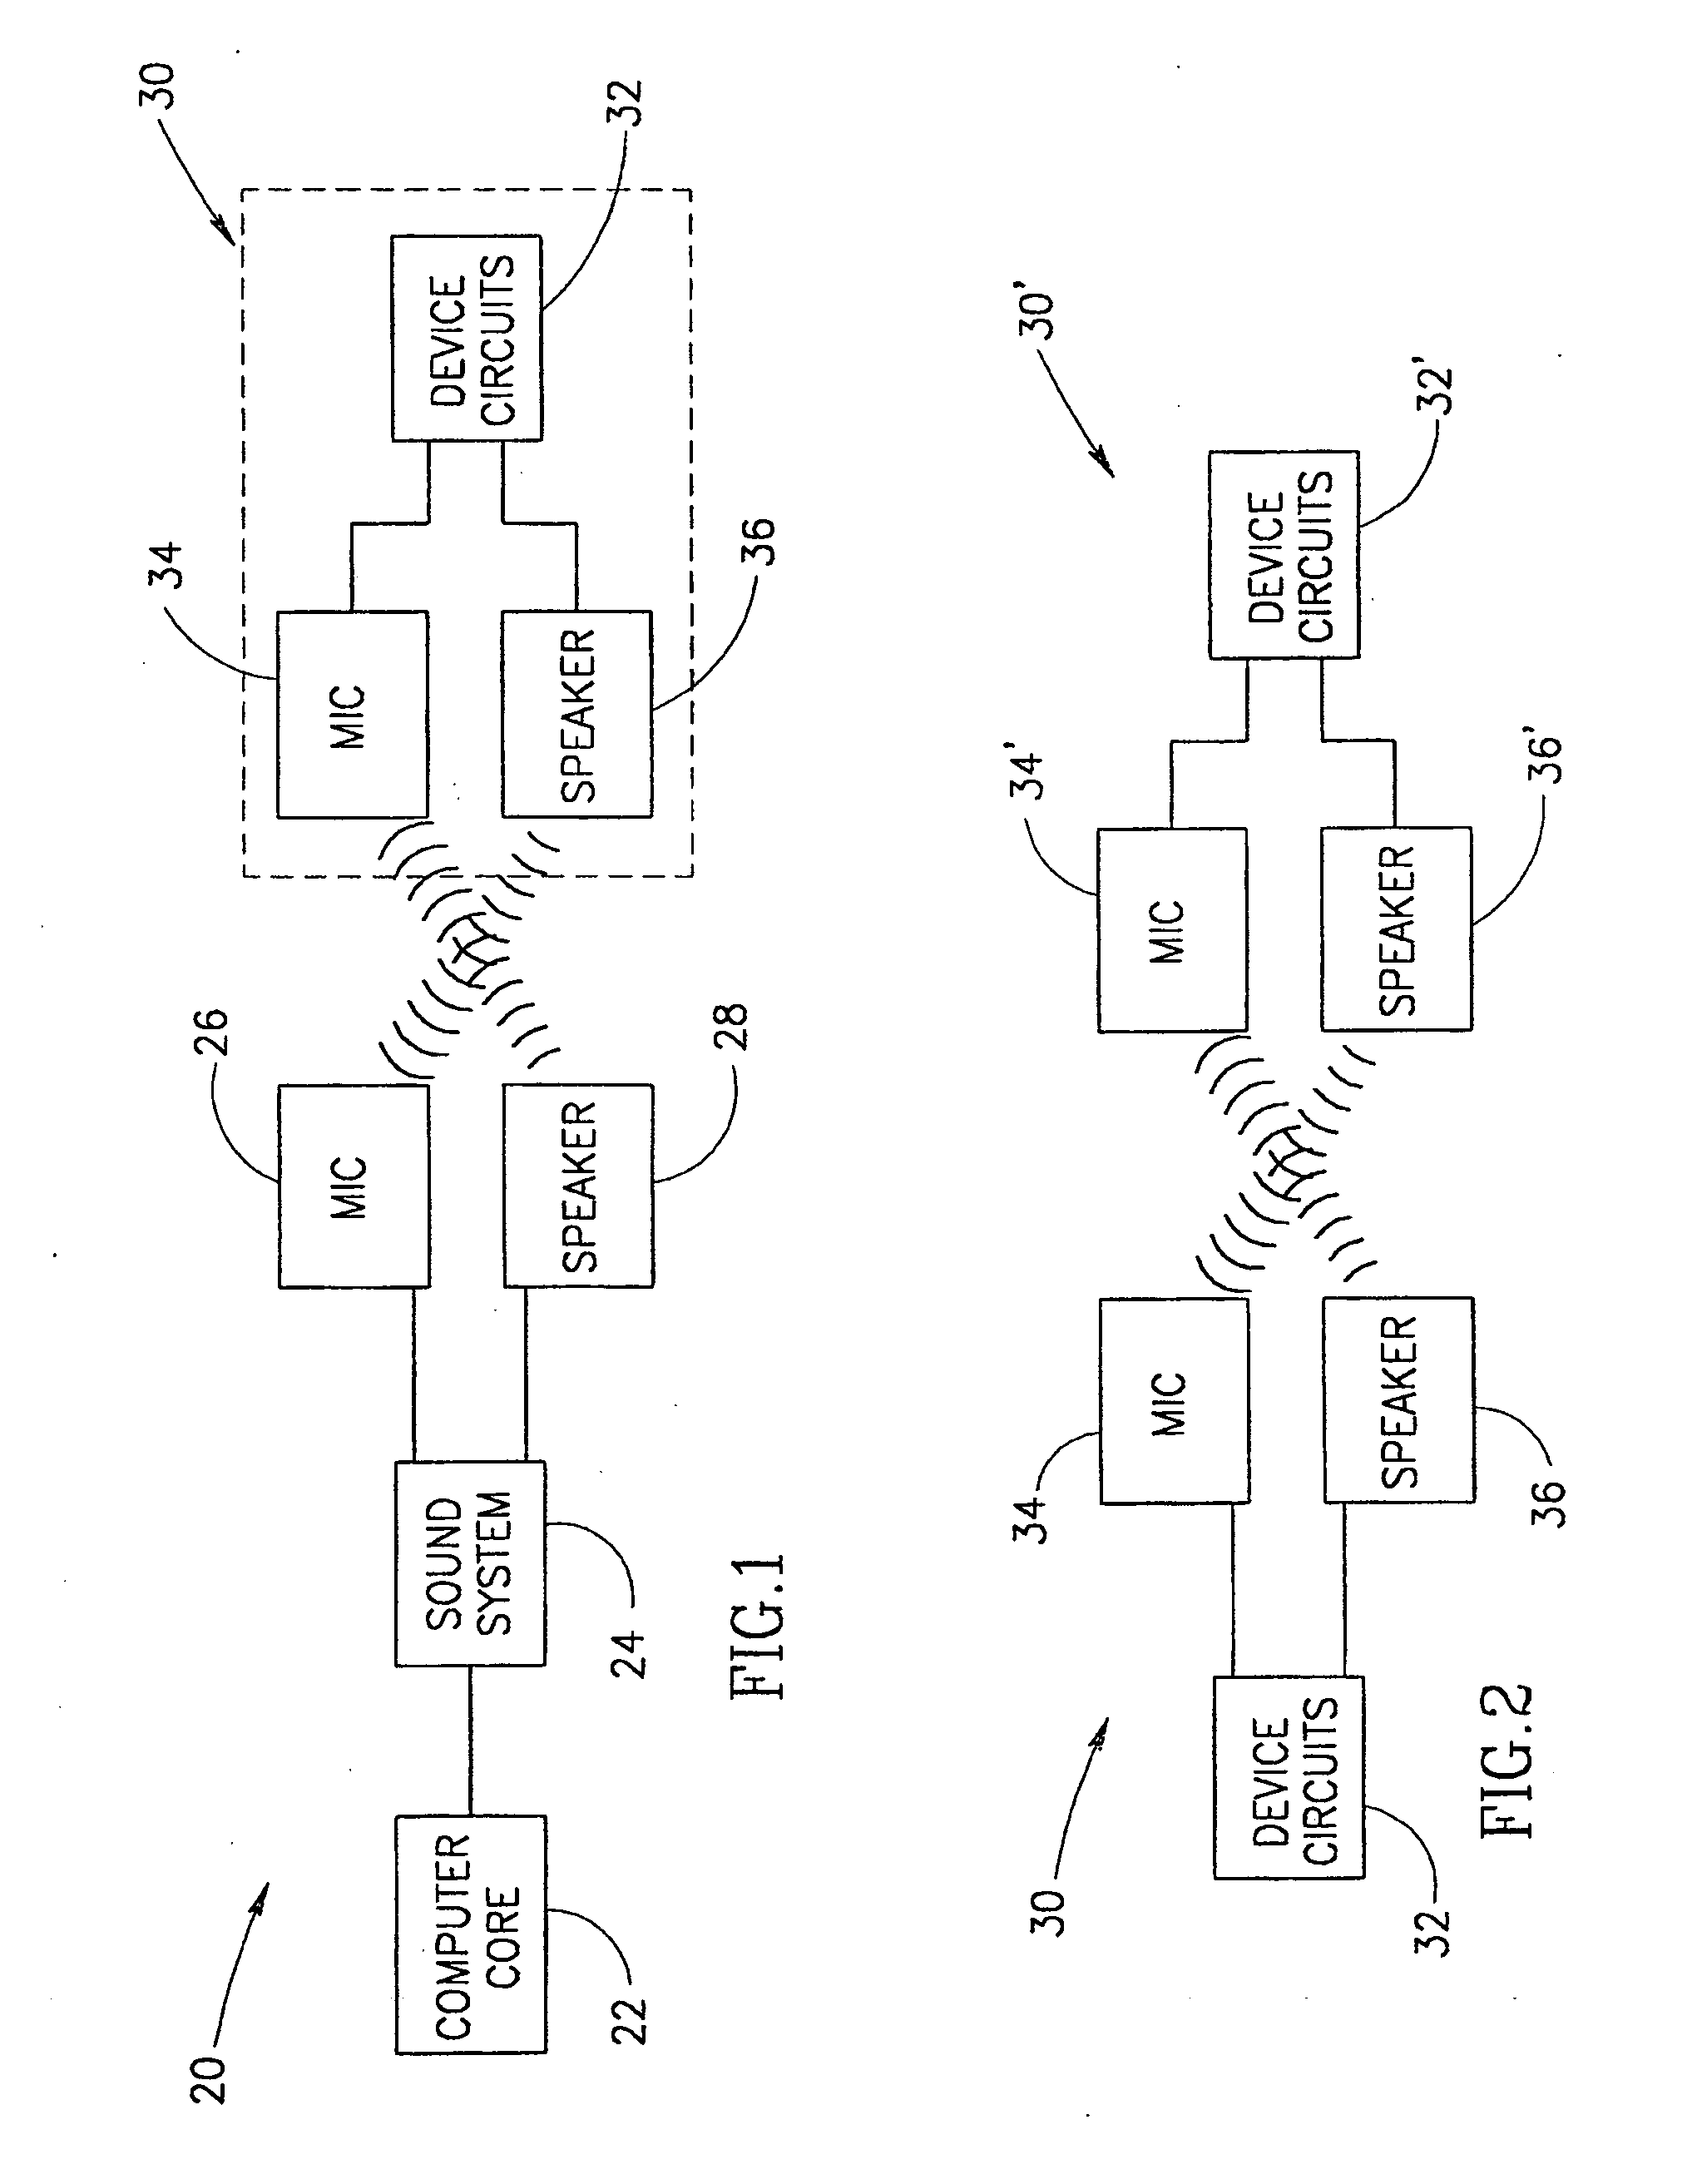 Method to use acoustic signals for computer communications